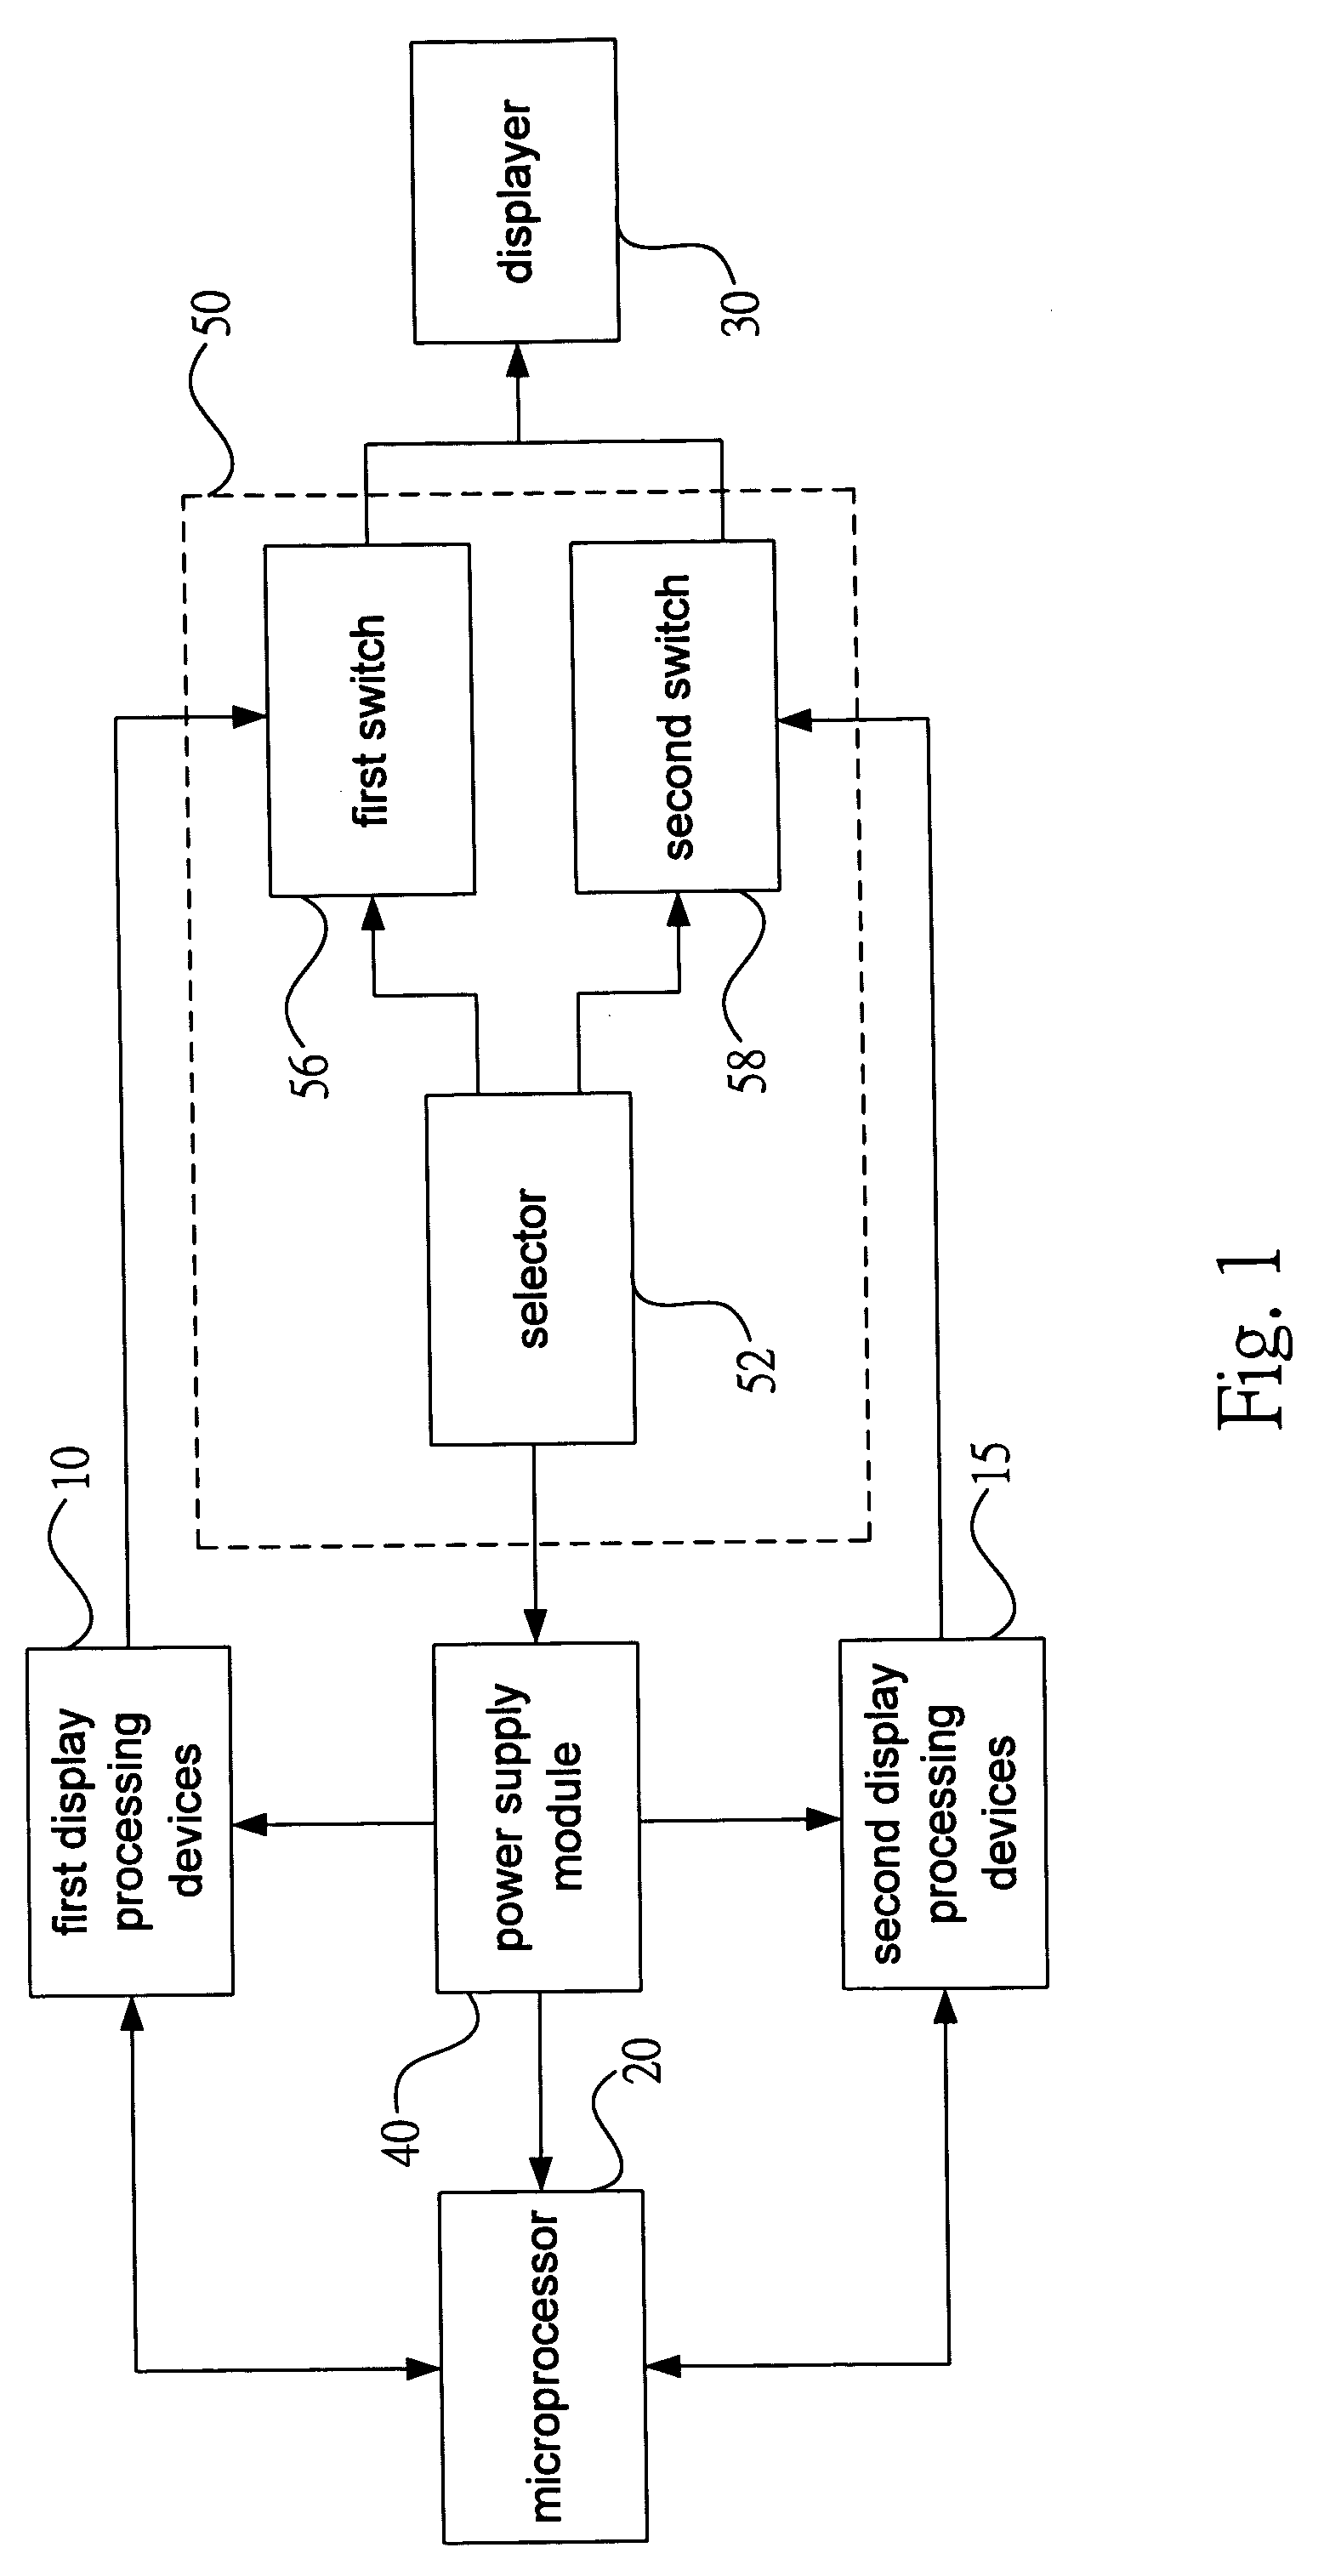 Display processing switching construct utilized in information device